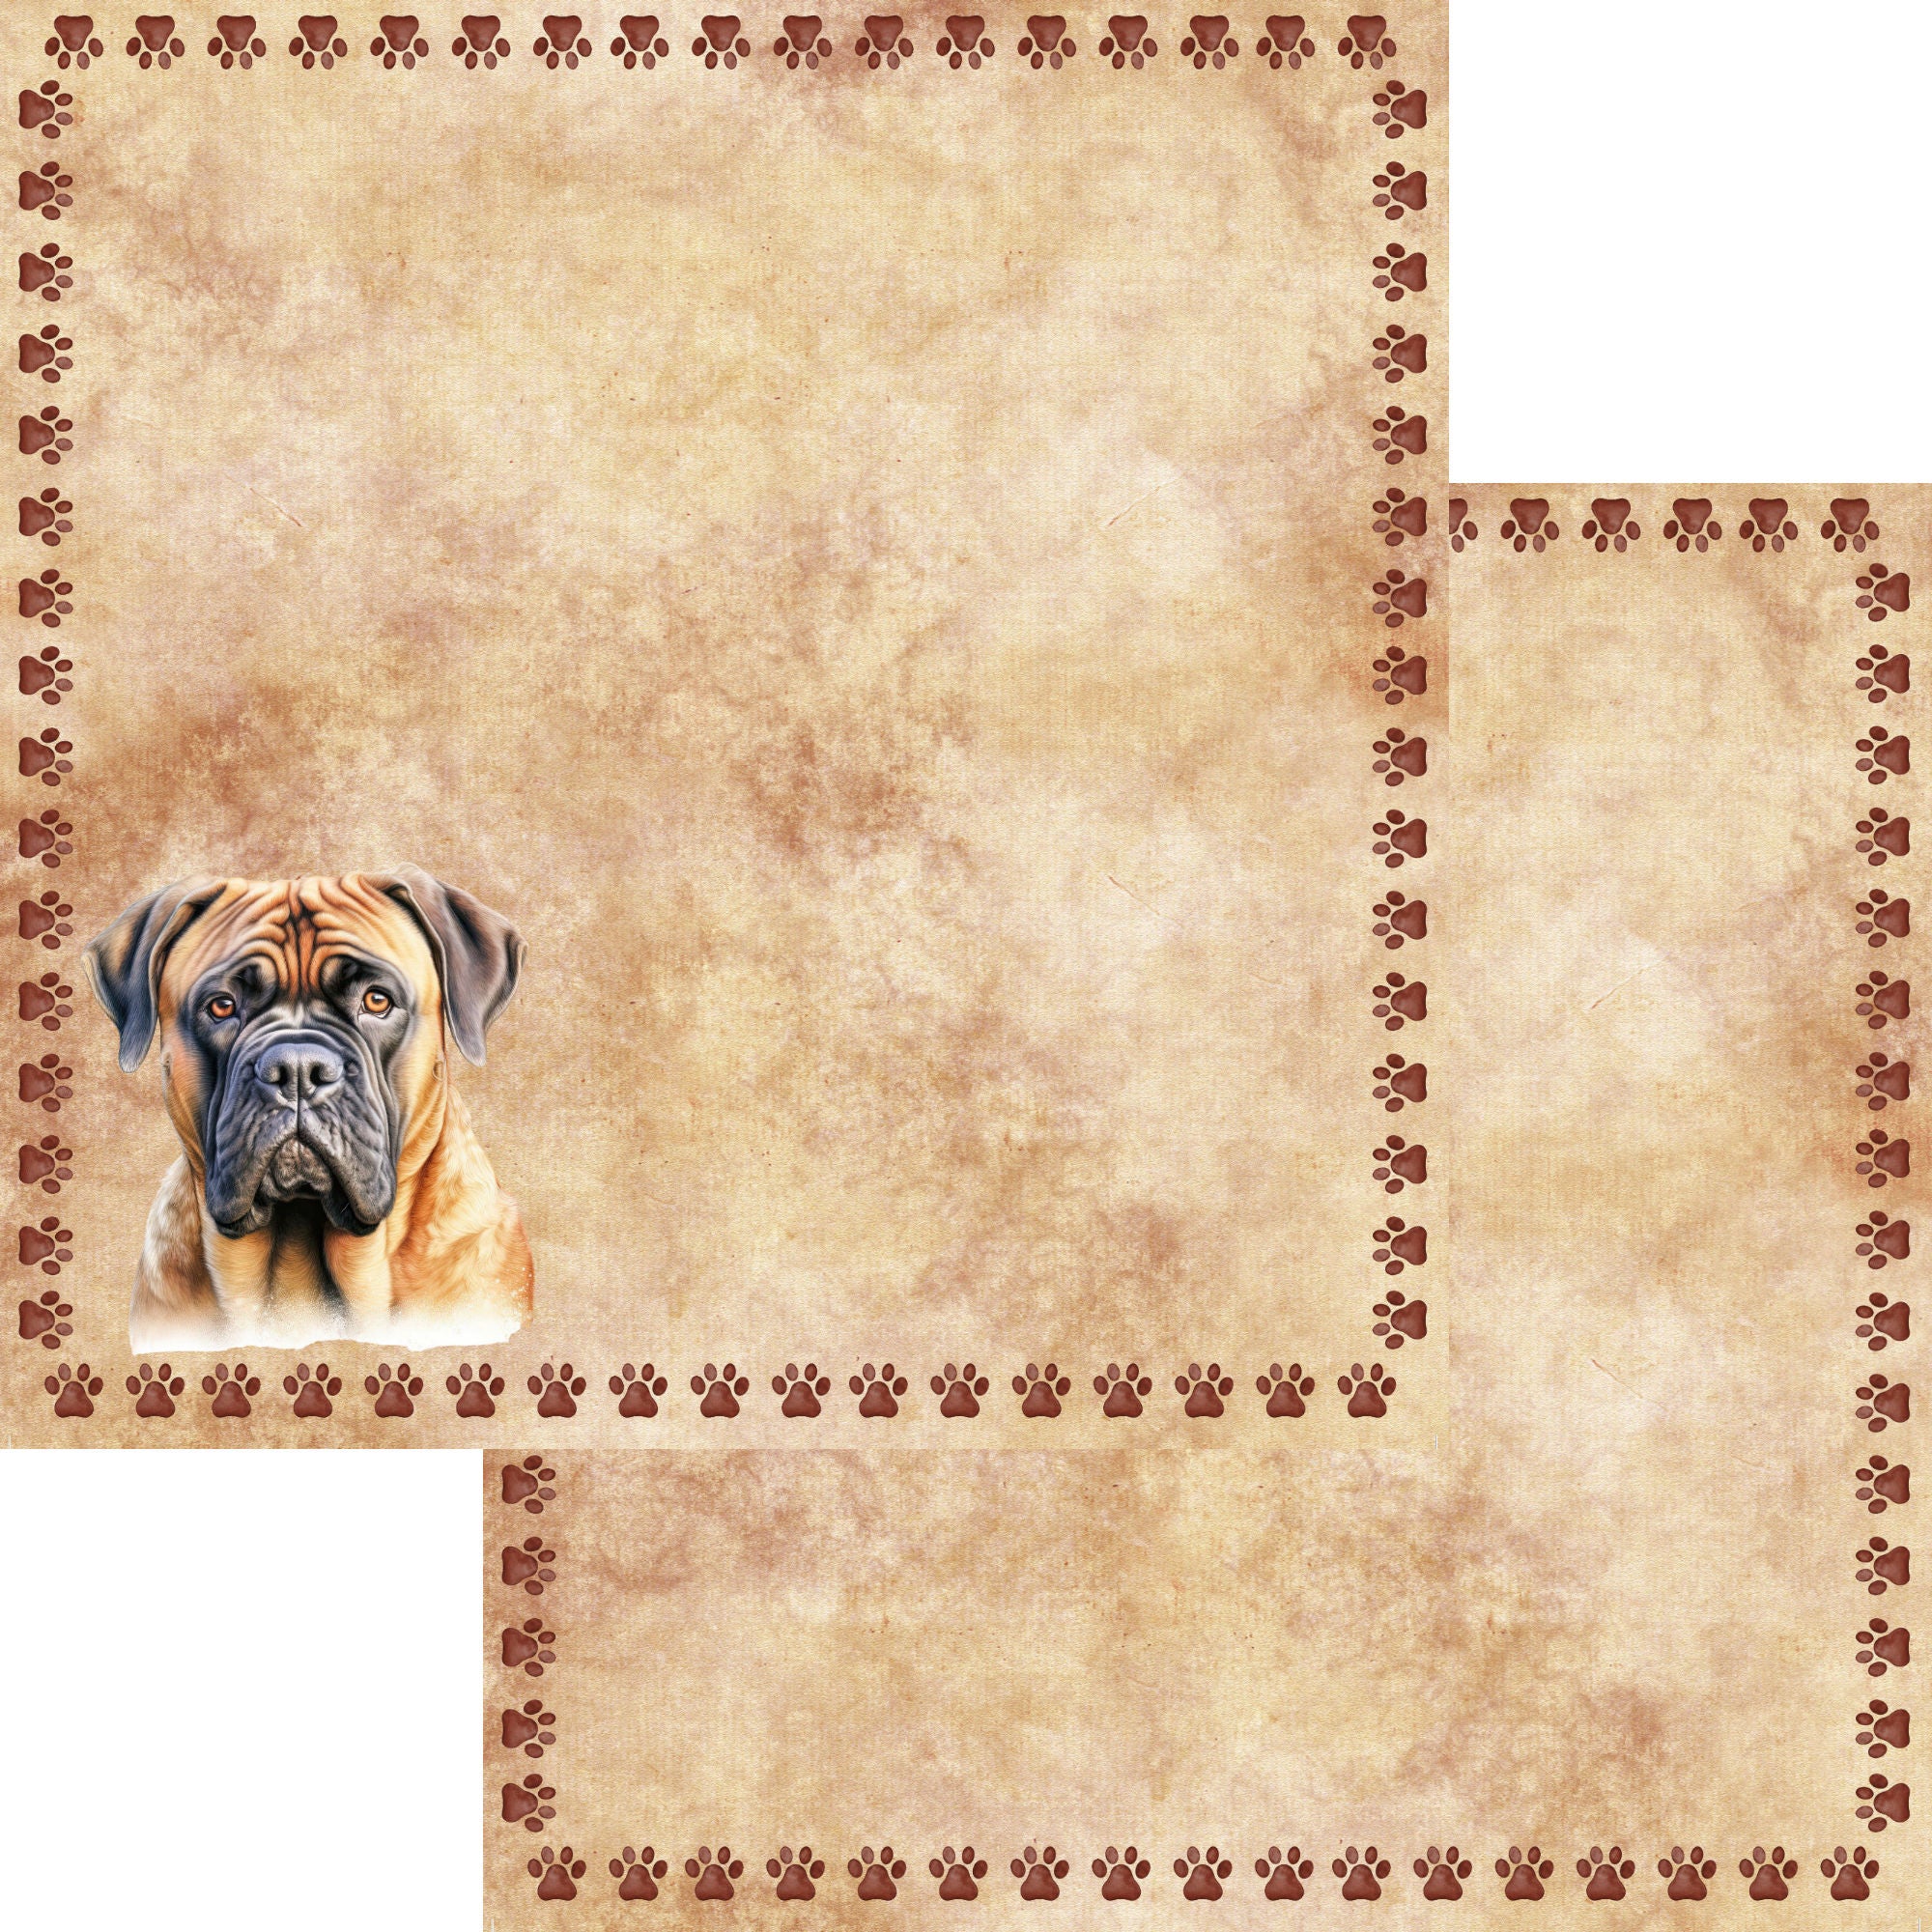 Dog Breeds Collection Bullmastiff 12 x 12 Double-Sided Scrapbook Paper by SSC Designs